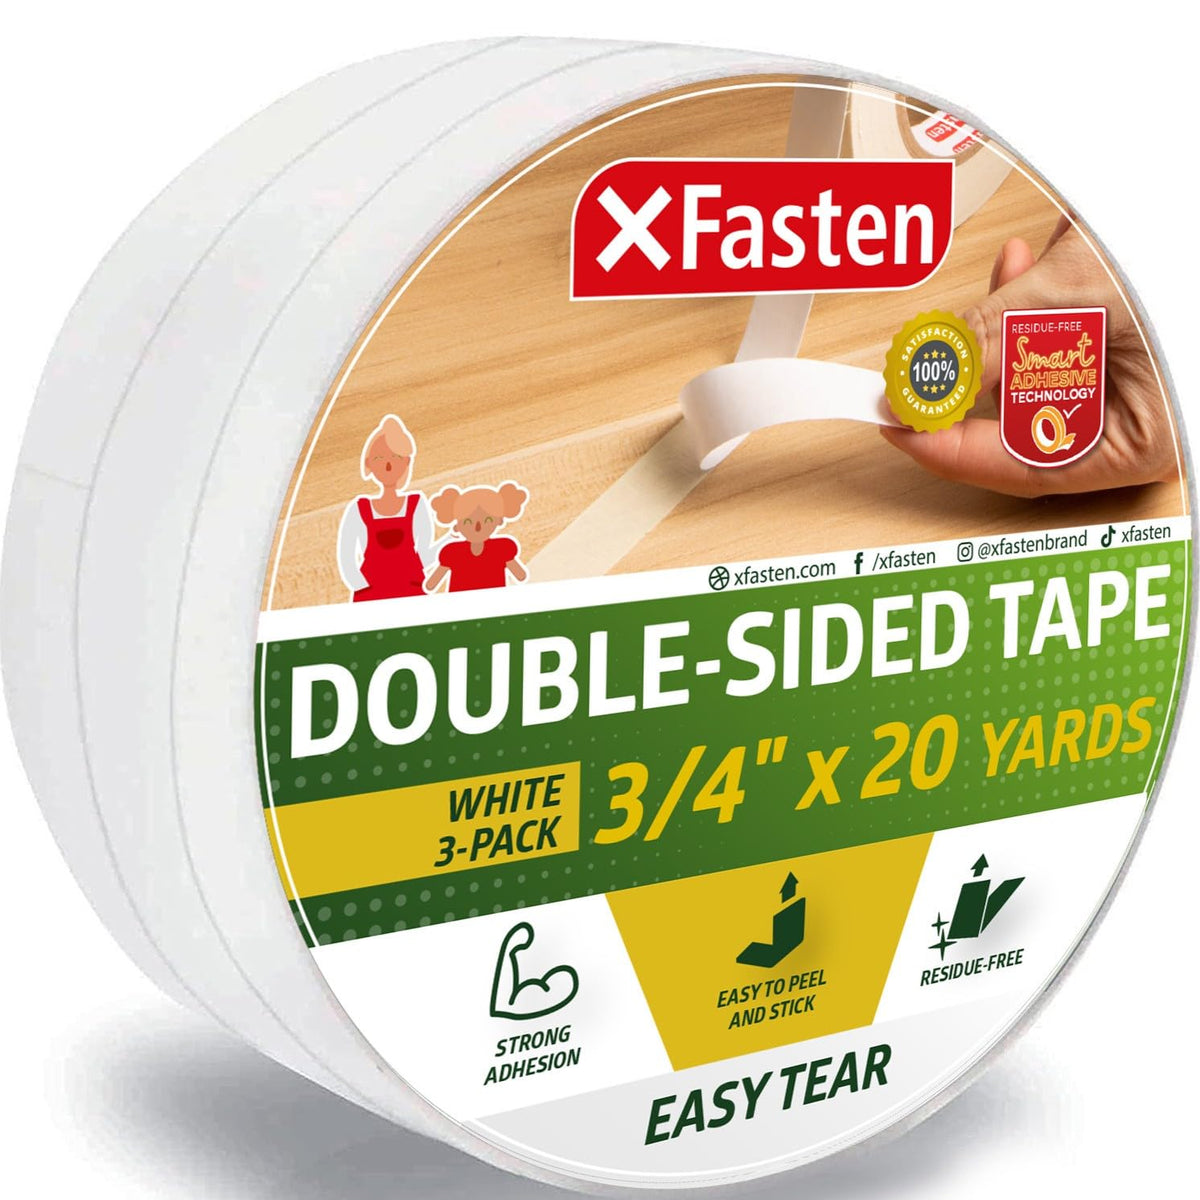 XFasten Double Sided Woodworking Tape, 1/2 Inch x 36 Yards